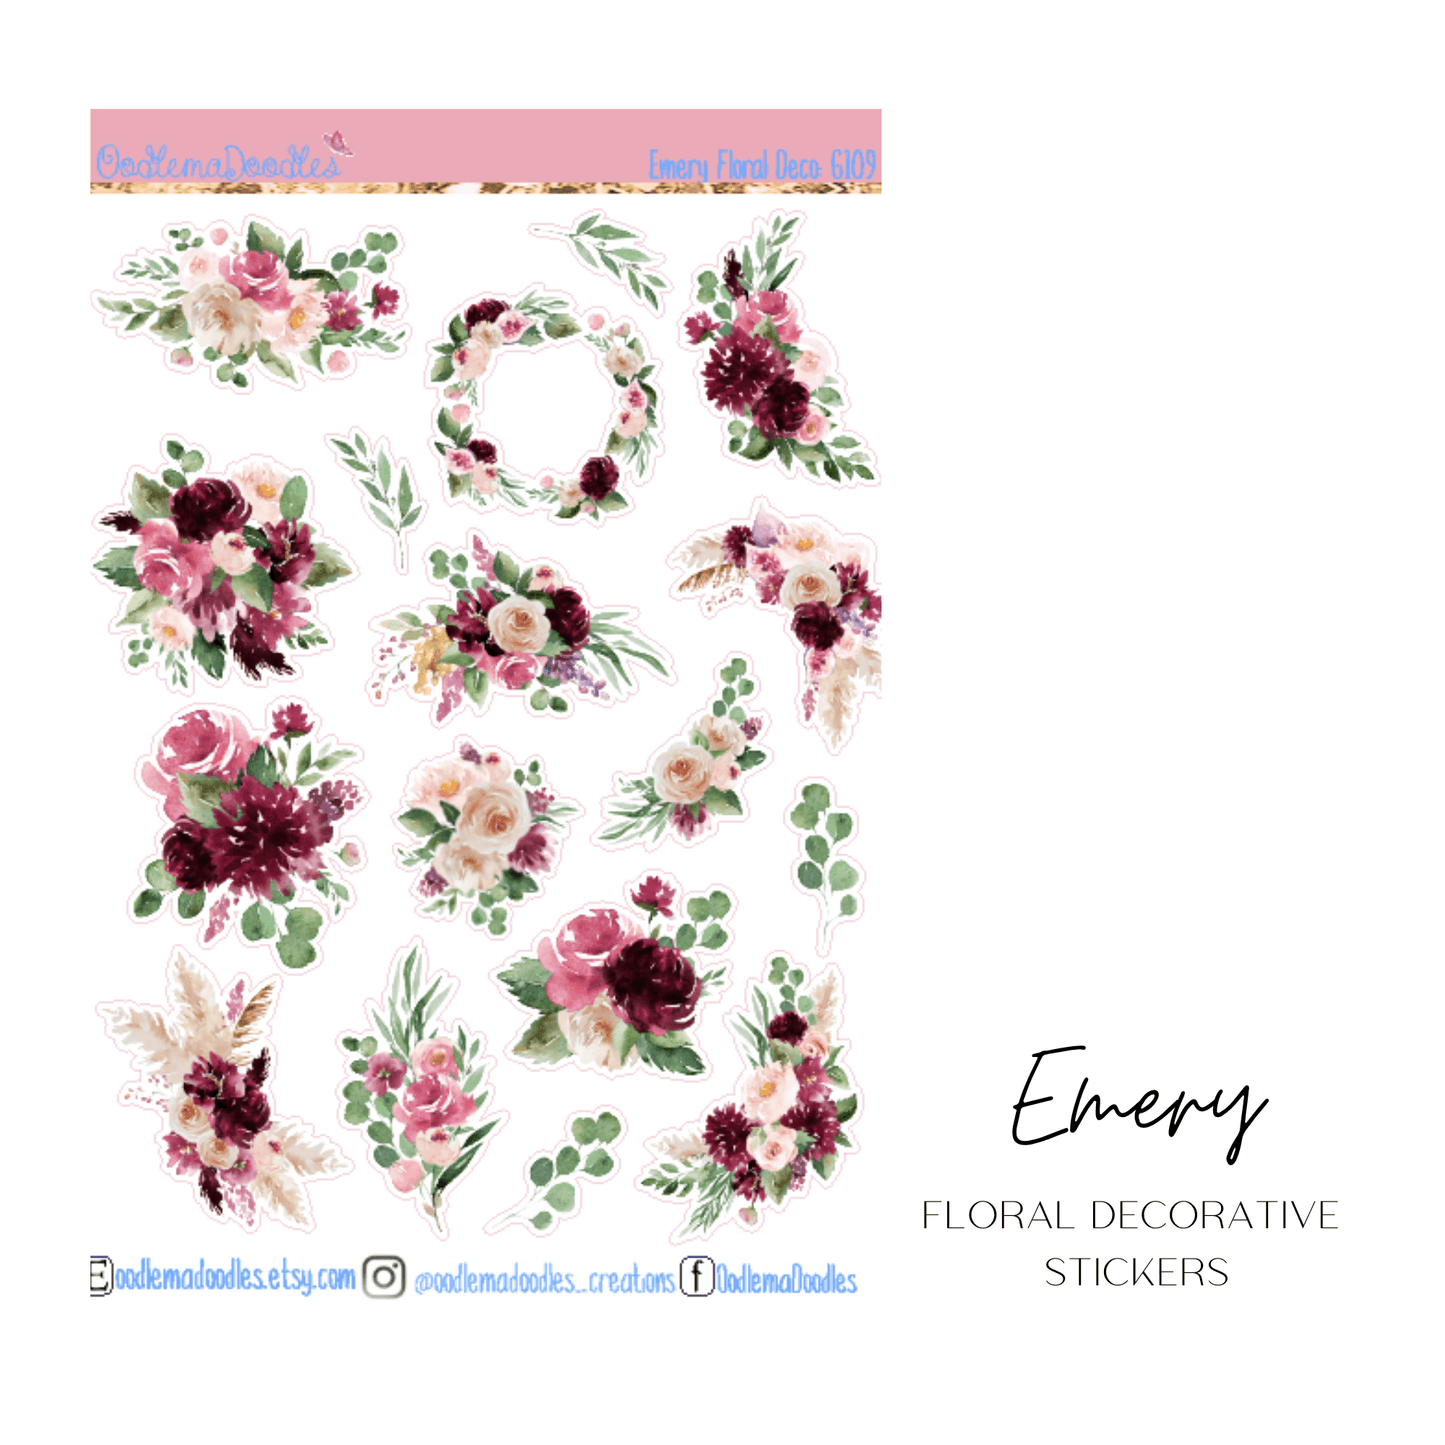 Emery Floral Decorative Stickers